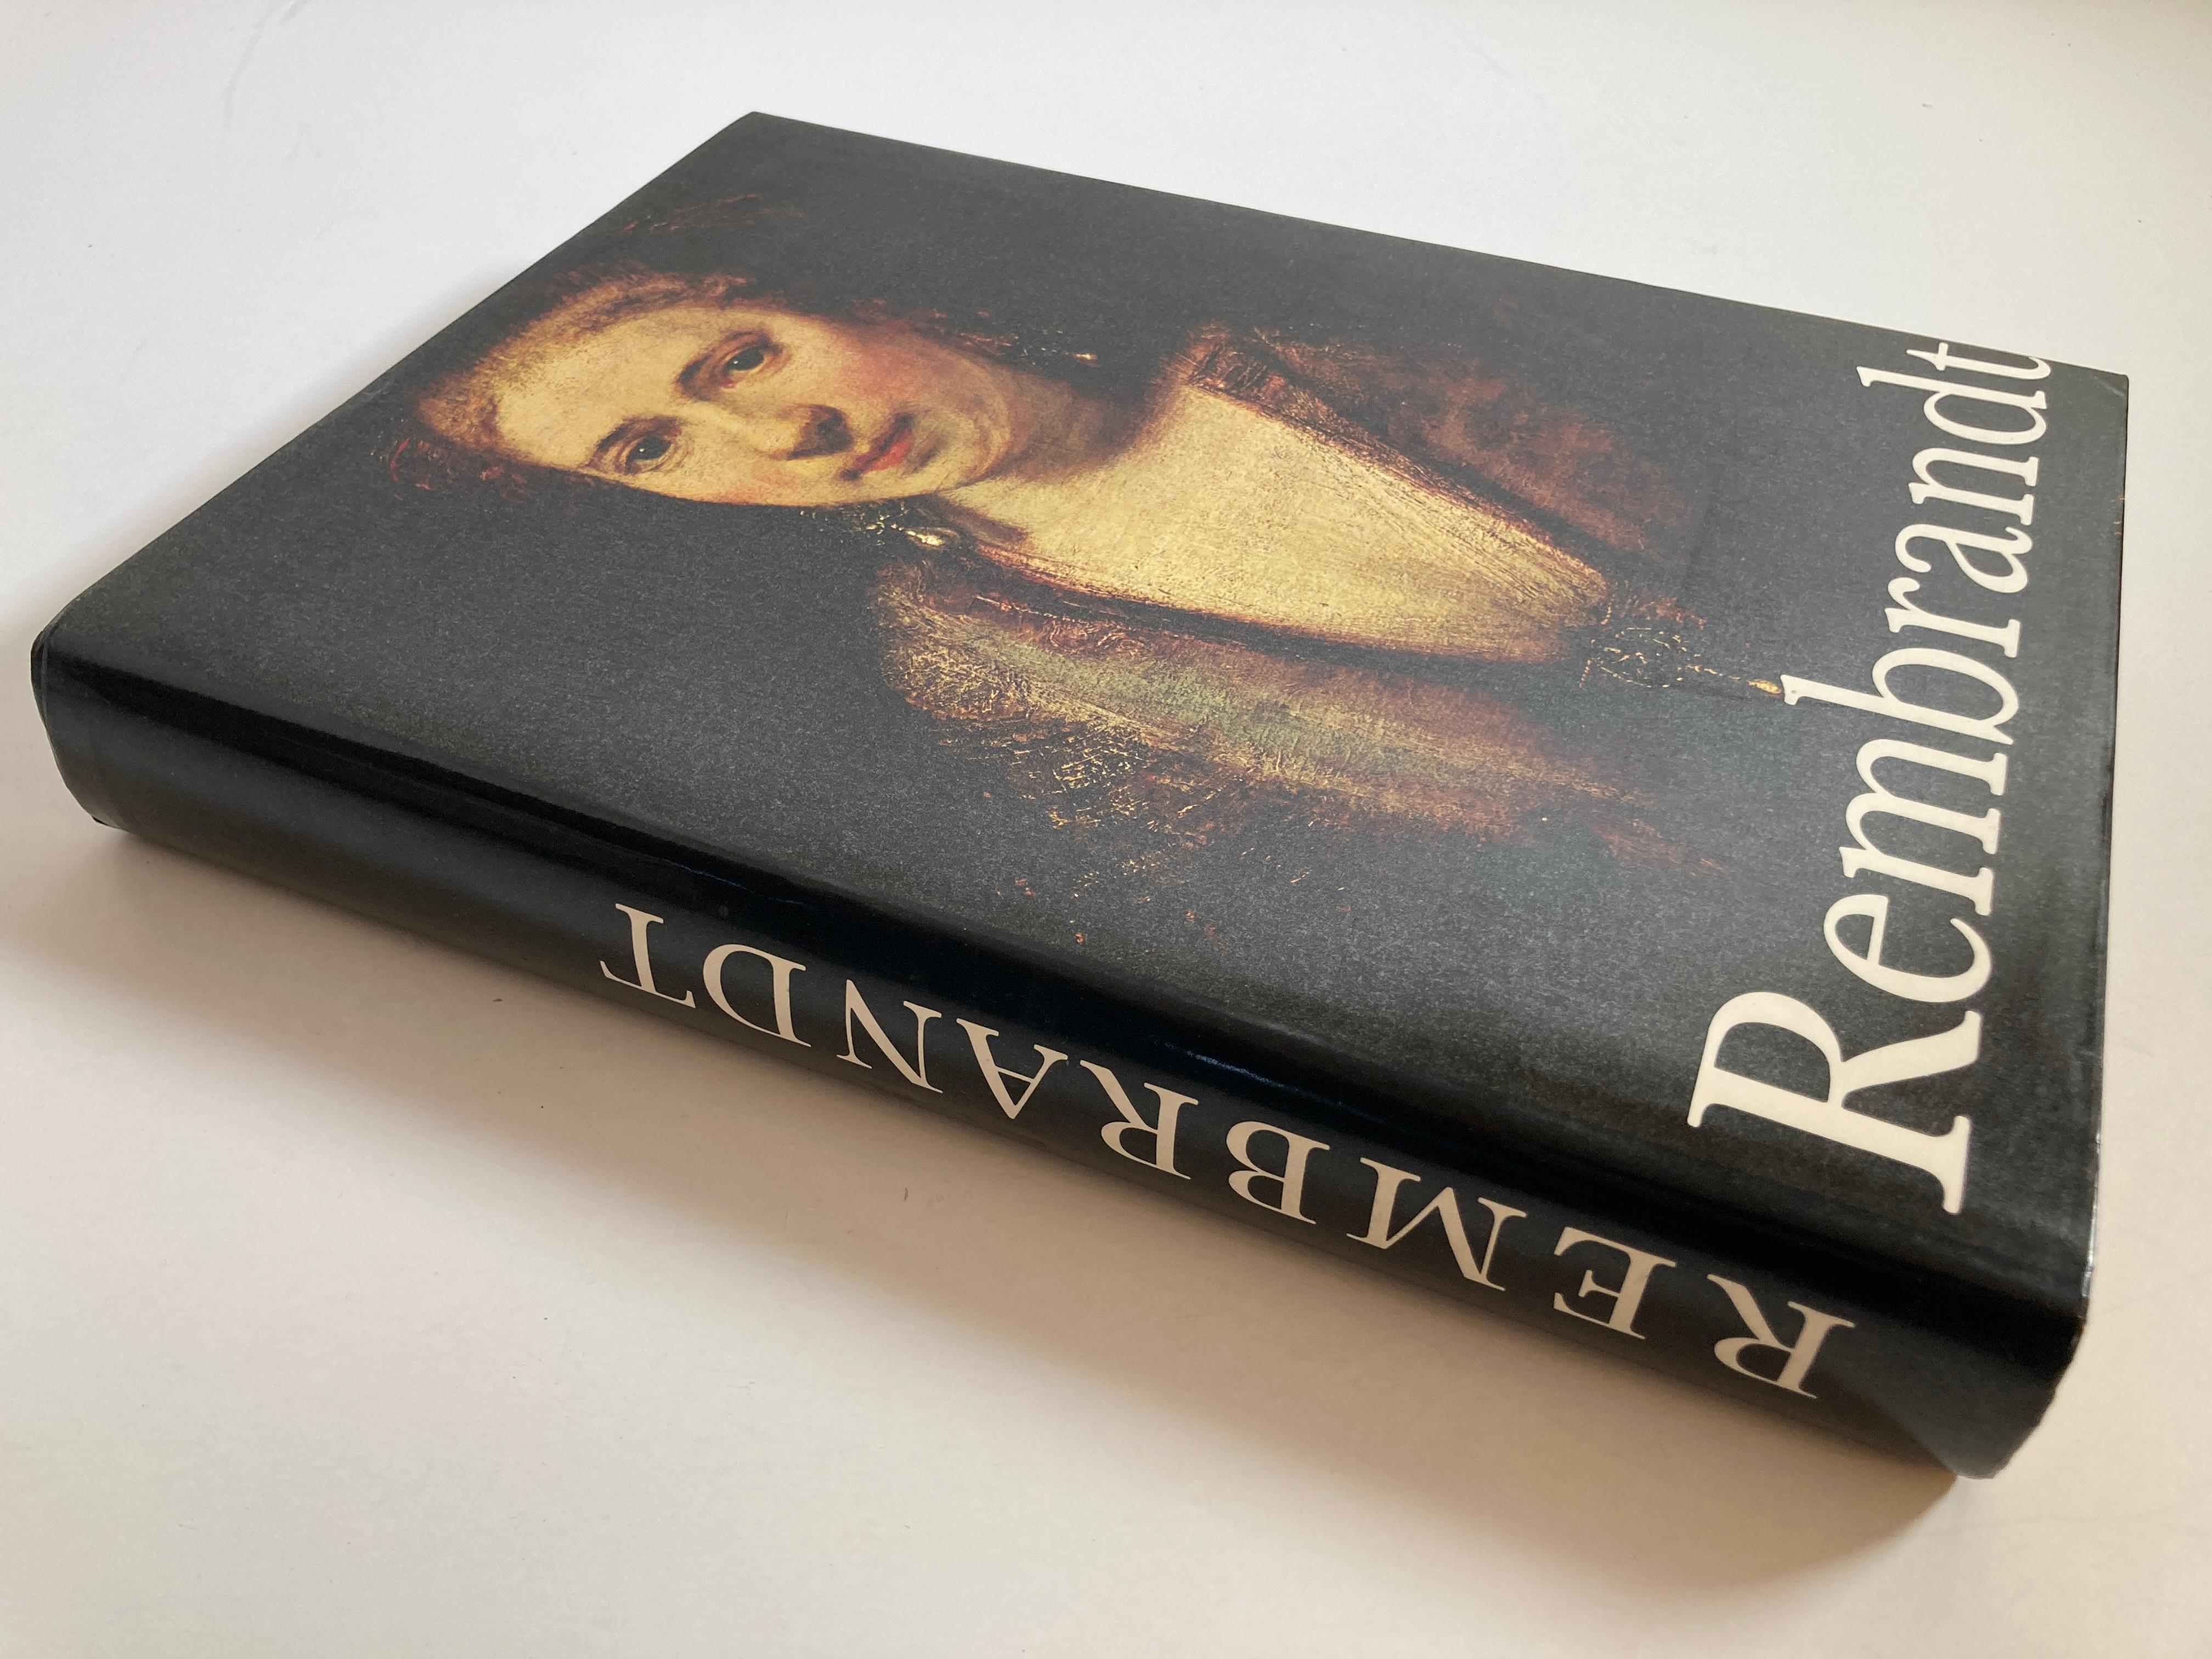 Rembrandt paintings hardcover book by Gerson Horst.
First edition, with 80 full-color plates and 650 black and white reproductions. A handsome copy.
Published by Reynall William Morrow, (New York), 1968.
Title: Rembrandt Paintings
Publisher: